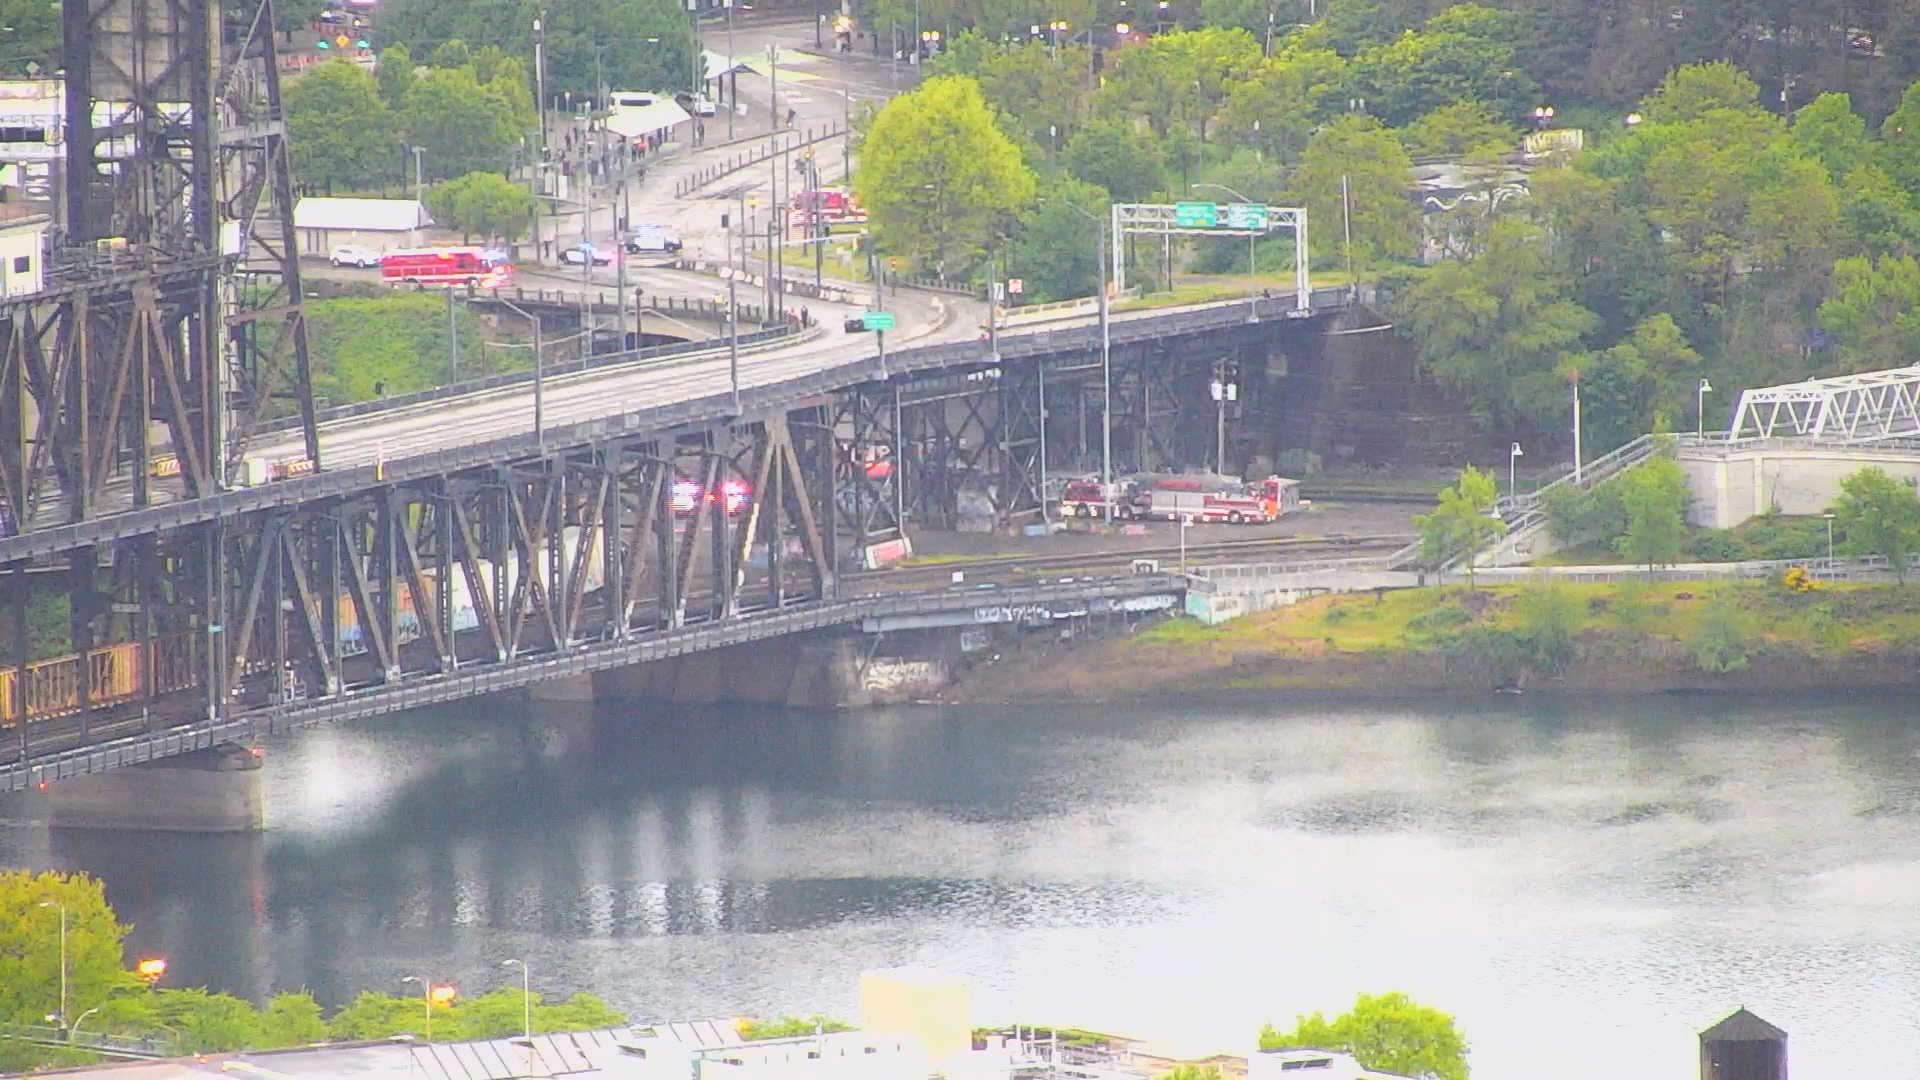 A train has derailed on the Steel Bridge in Portland, according to Portland Fire & Rescue. The agency said a total of six cars were involved. The bridge is closed.